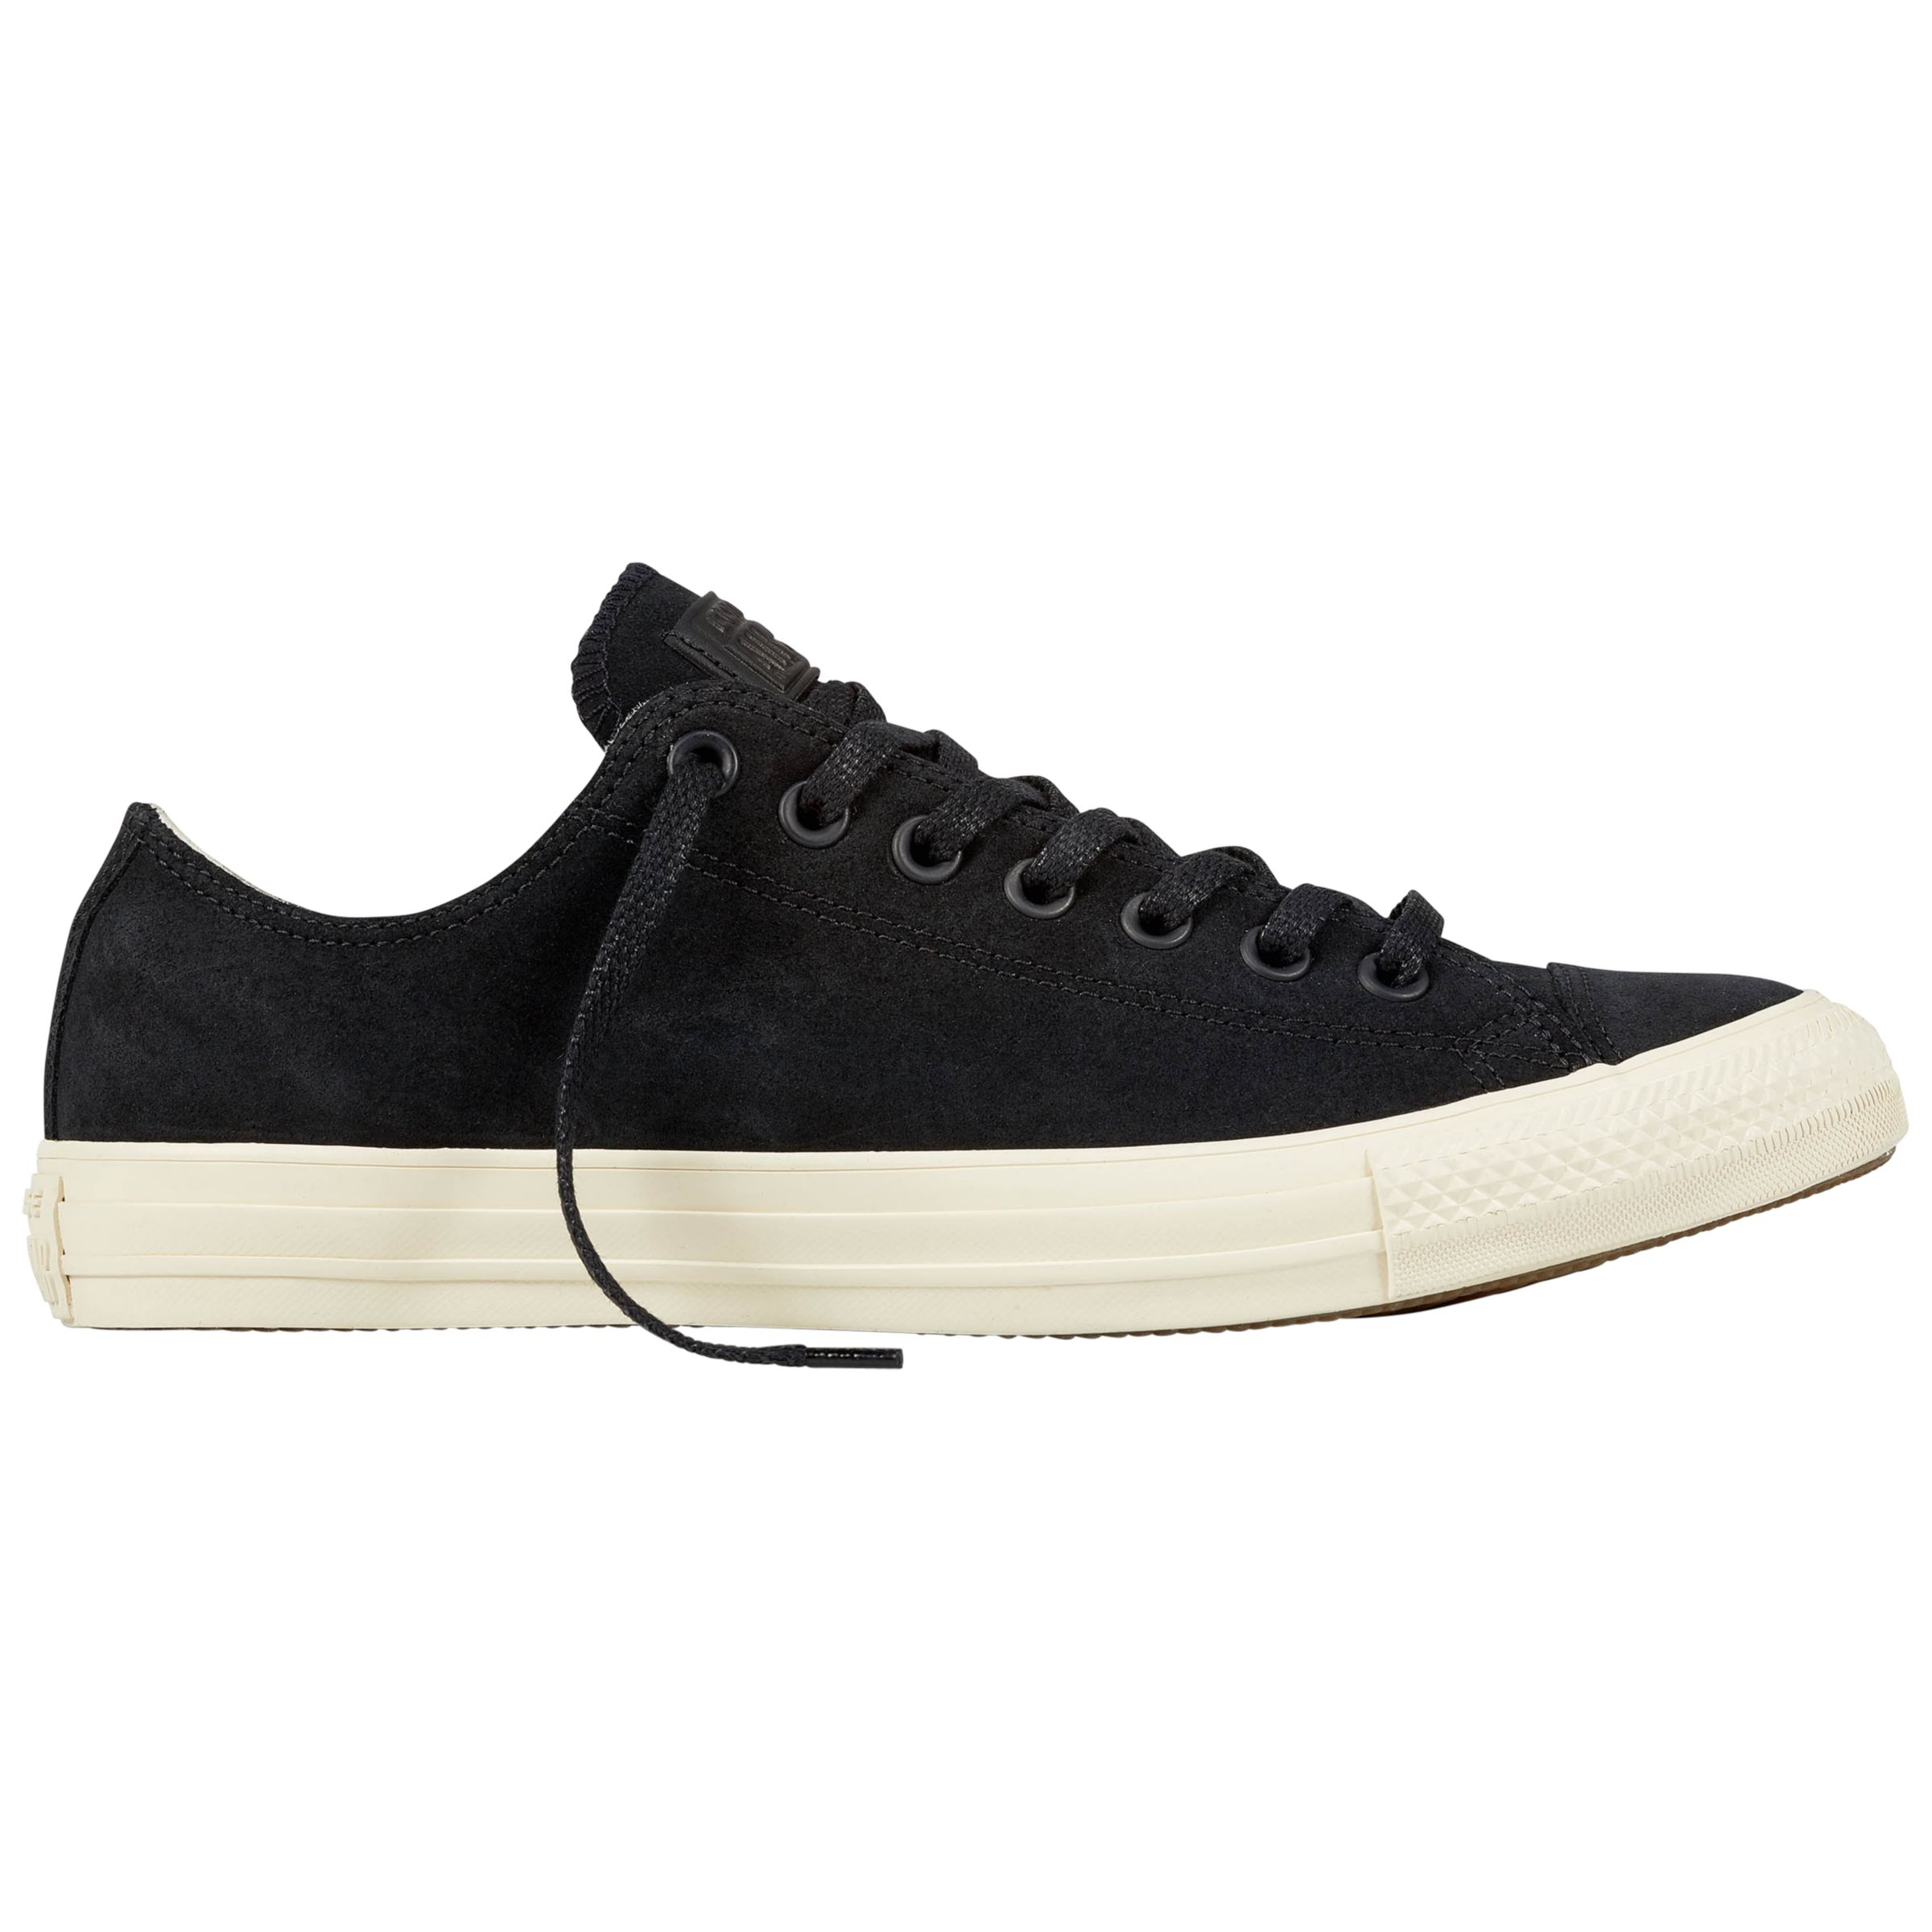 suede converse boots